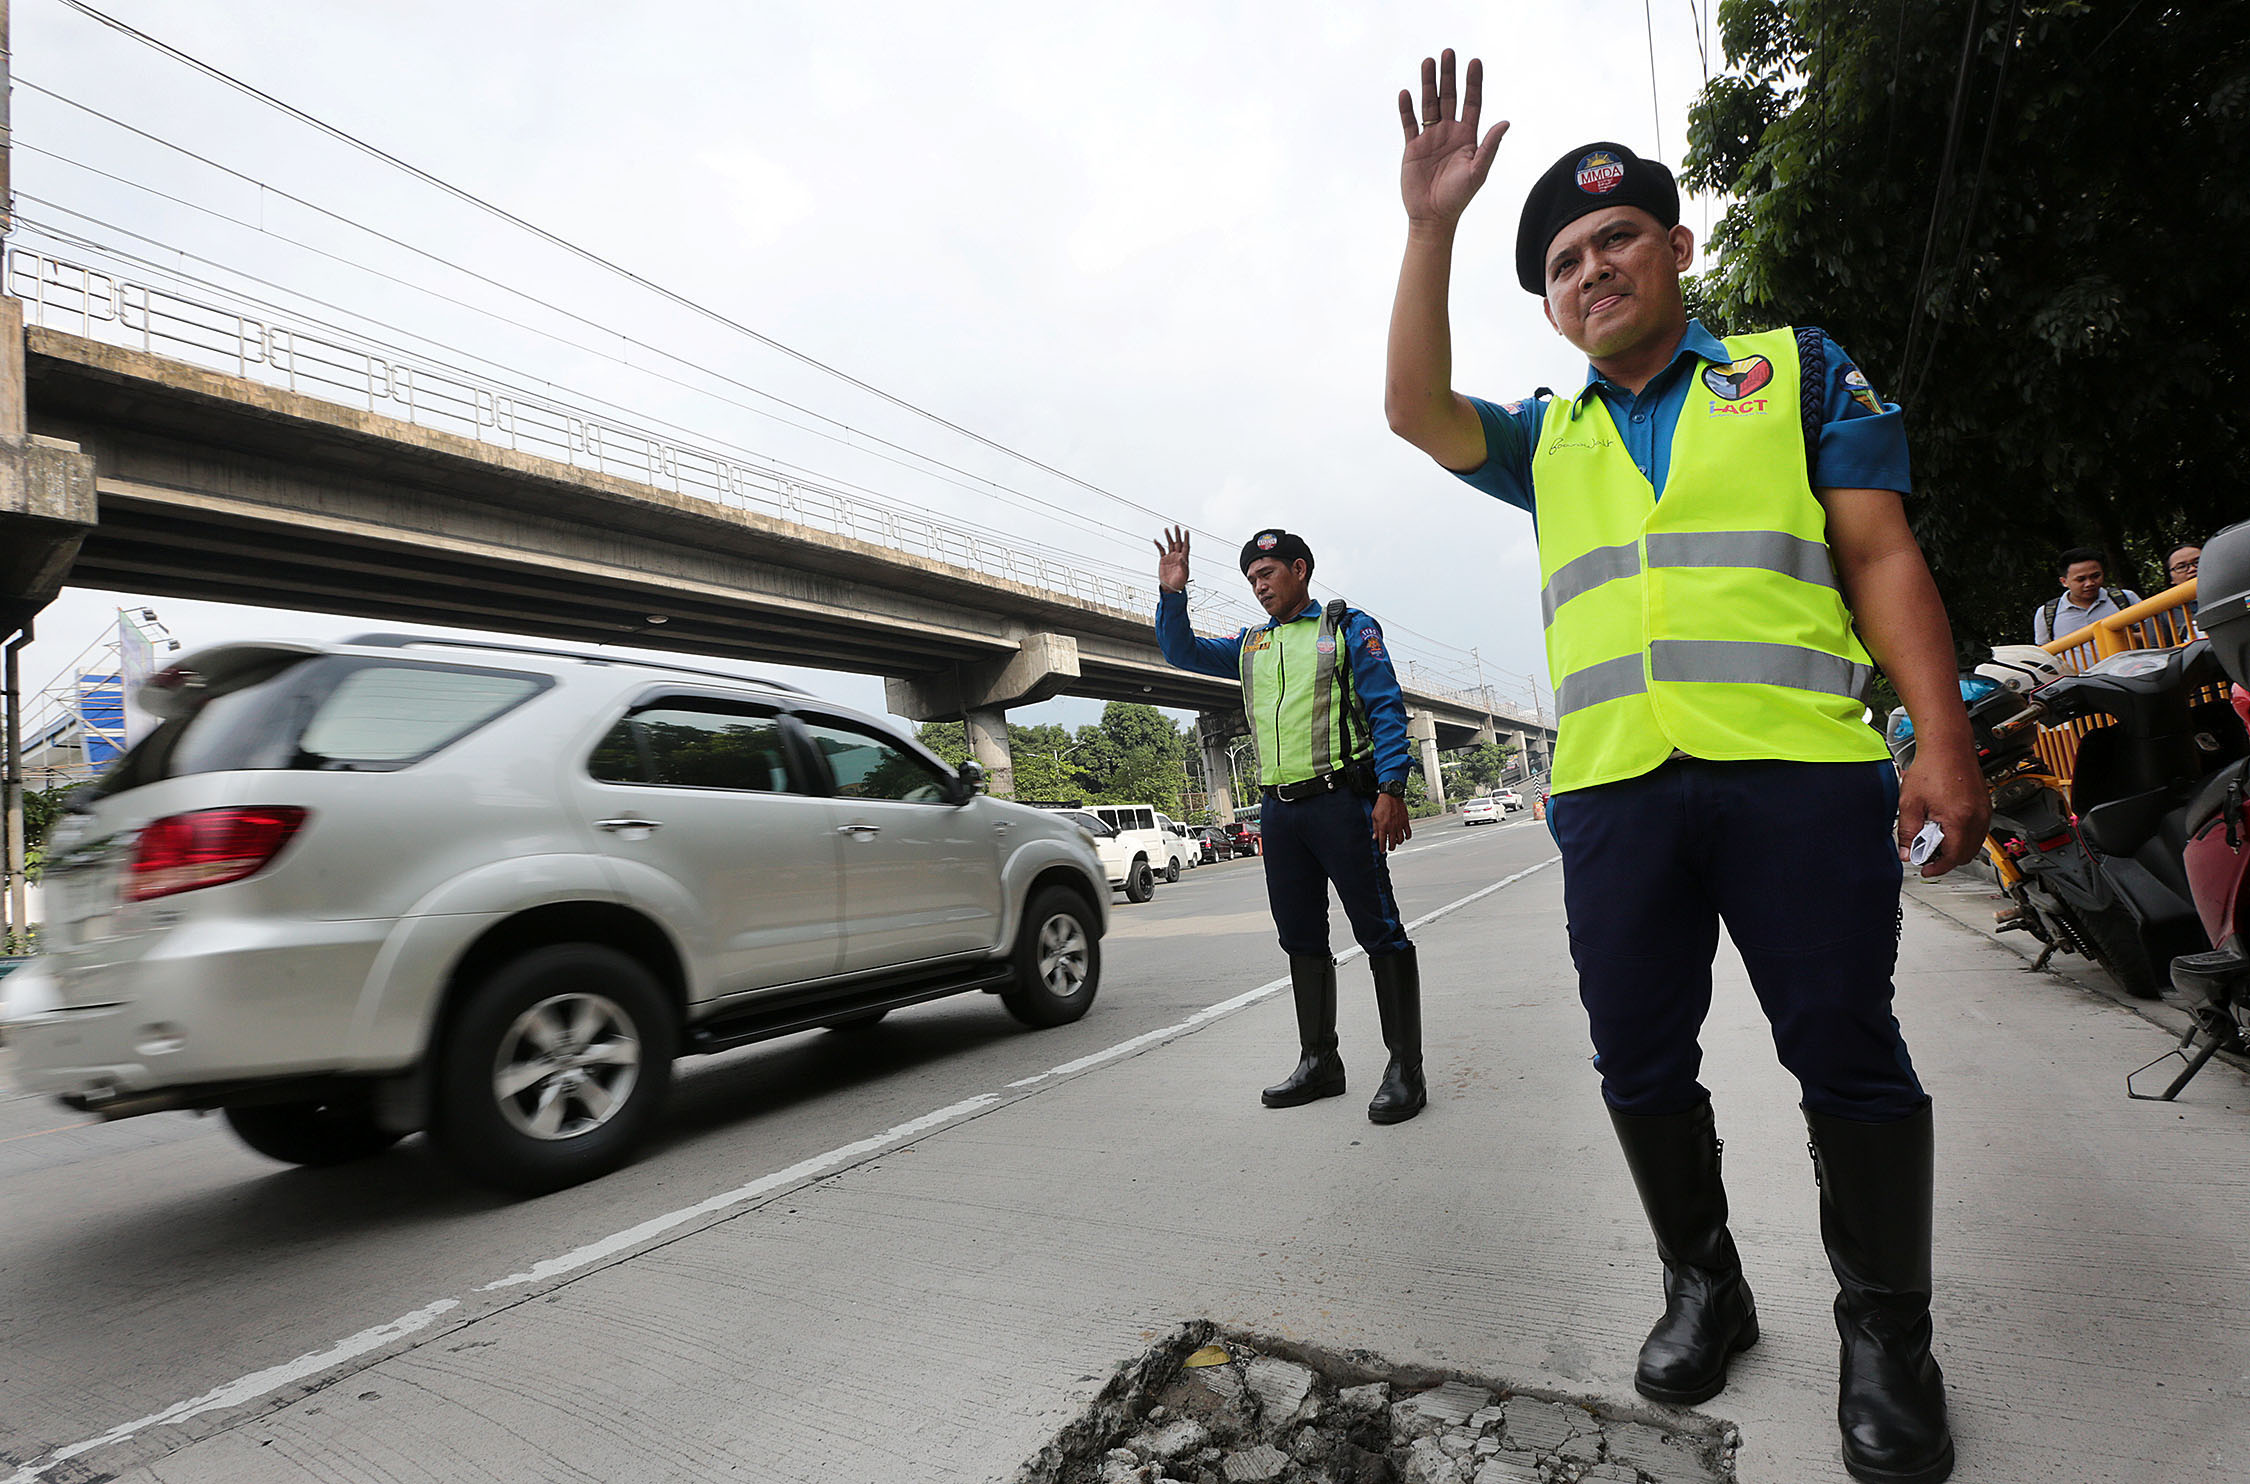 HIGH OCCUPANCY VEHICLE SCHEME / AUGUST 15, 2018 Traffic enforcers of the Metro Manila Development Authority (MMDA) monitor vehicles along Epifanio de los Santos Avenue (EDSA) at the start of the weeklong dry run on Wednesday, August 15, 2018, of the High Occupancy Vehicle (HOV) traffic scheme.  The scheme aims to reduce the volume of vehicles especially private cars along EDSA during rush hours as it prohibits vehicles with drivers only to pass through the highway.  INQUIRER PHOTO / GRIG C. MONTEGRANDE